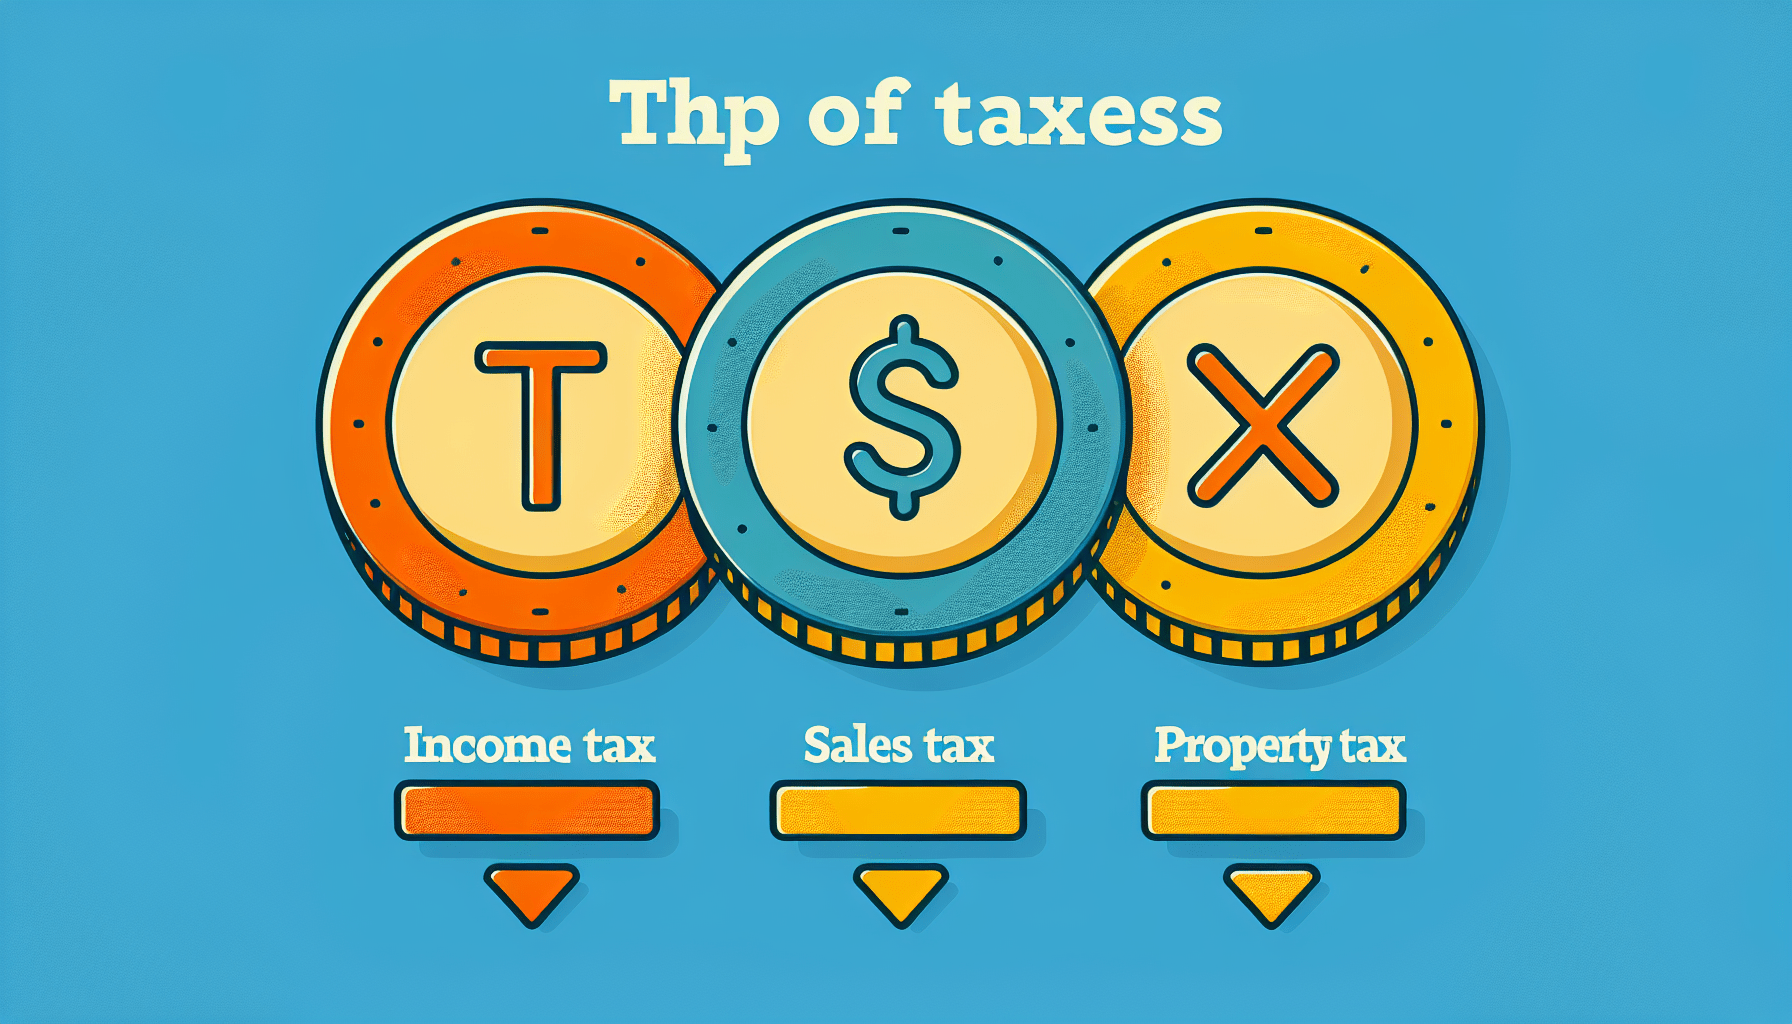 What Are The Three Main Taxes?